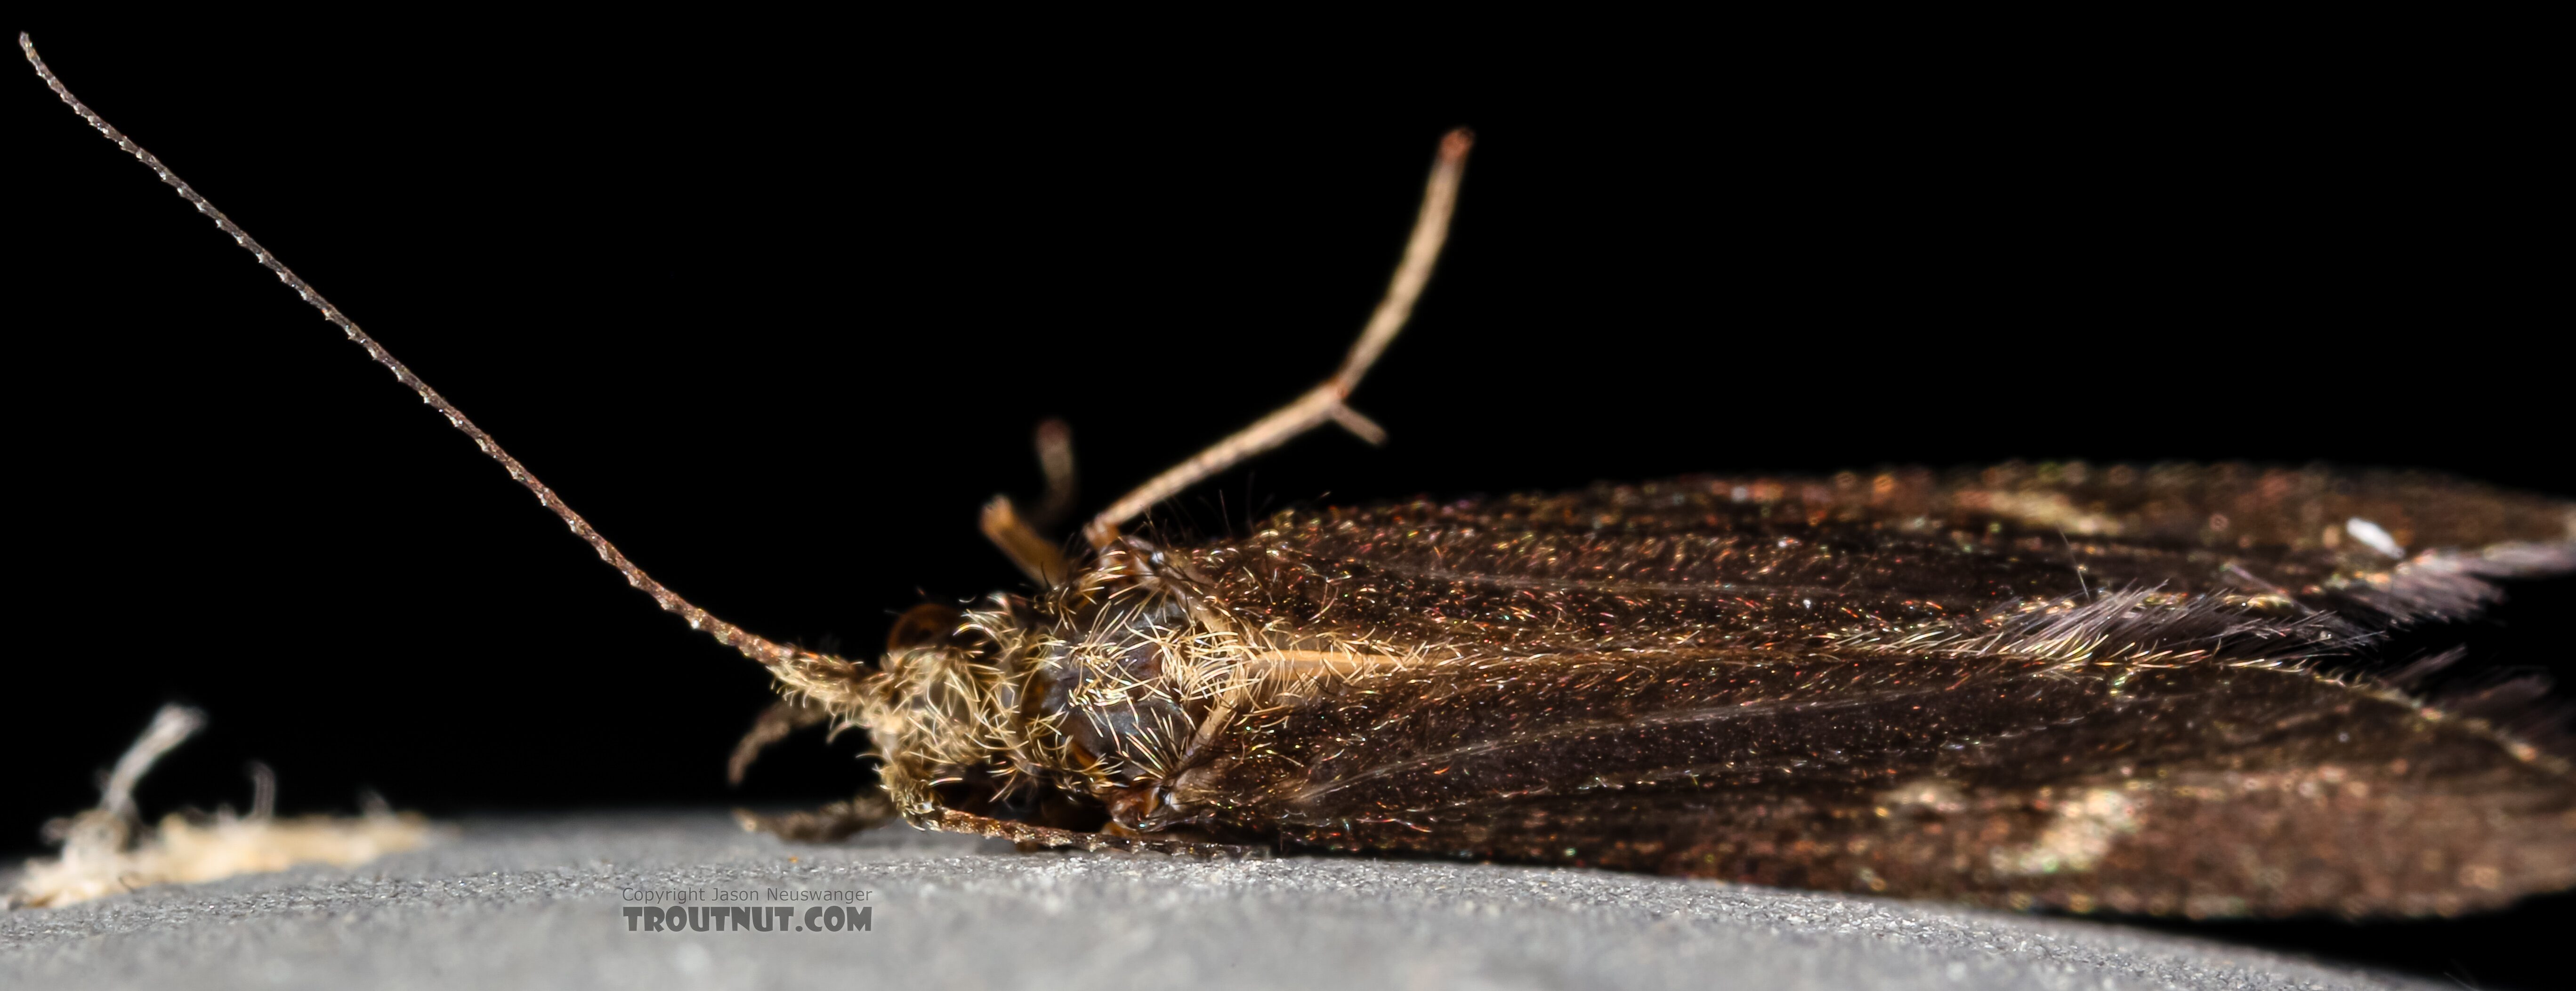 Helicopsyche borealis (Speckled Peter) Caddisfly Adult from the Henry's Fork of the Snake River in Idaho